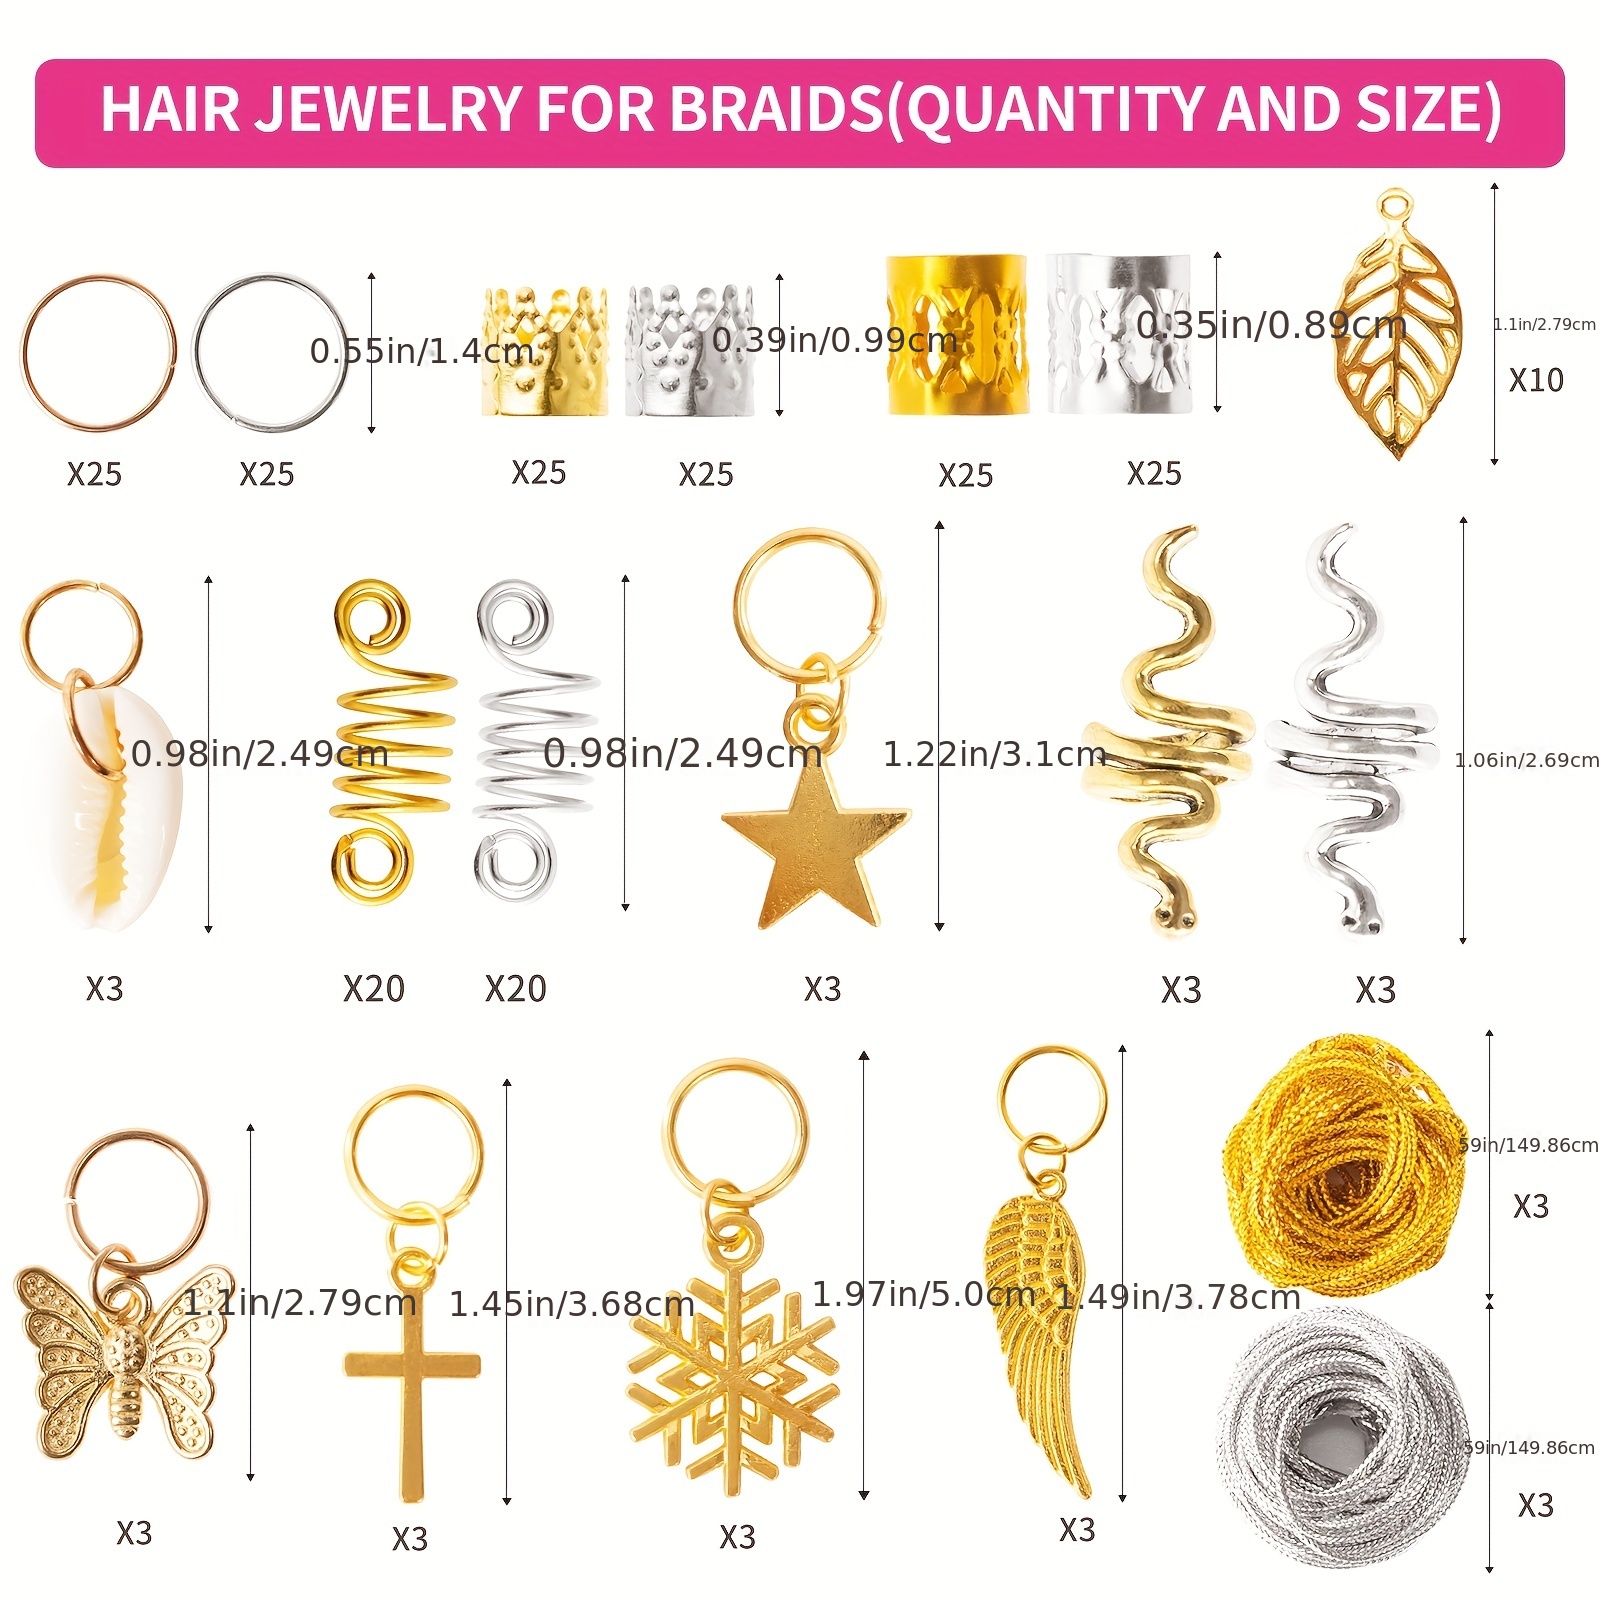 200 Pcs LOC Hair Jewelry for Braids Metal Gold and Silver Hair Charms for Women Hair Beads Rings Cuffs Dreadlocks Accessories Decoration